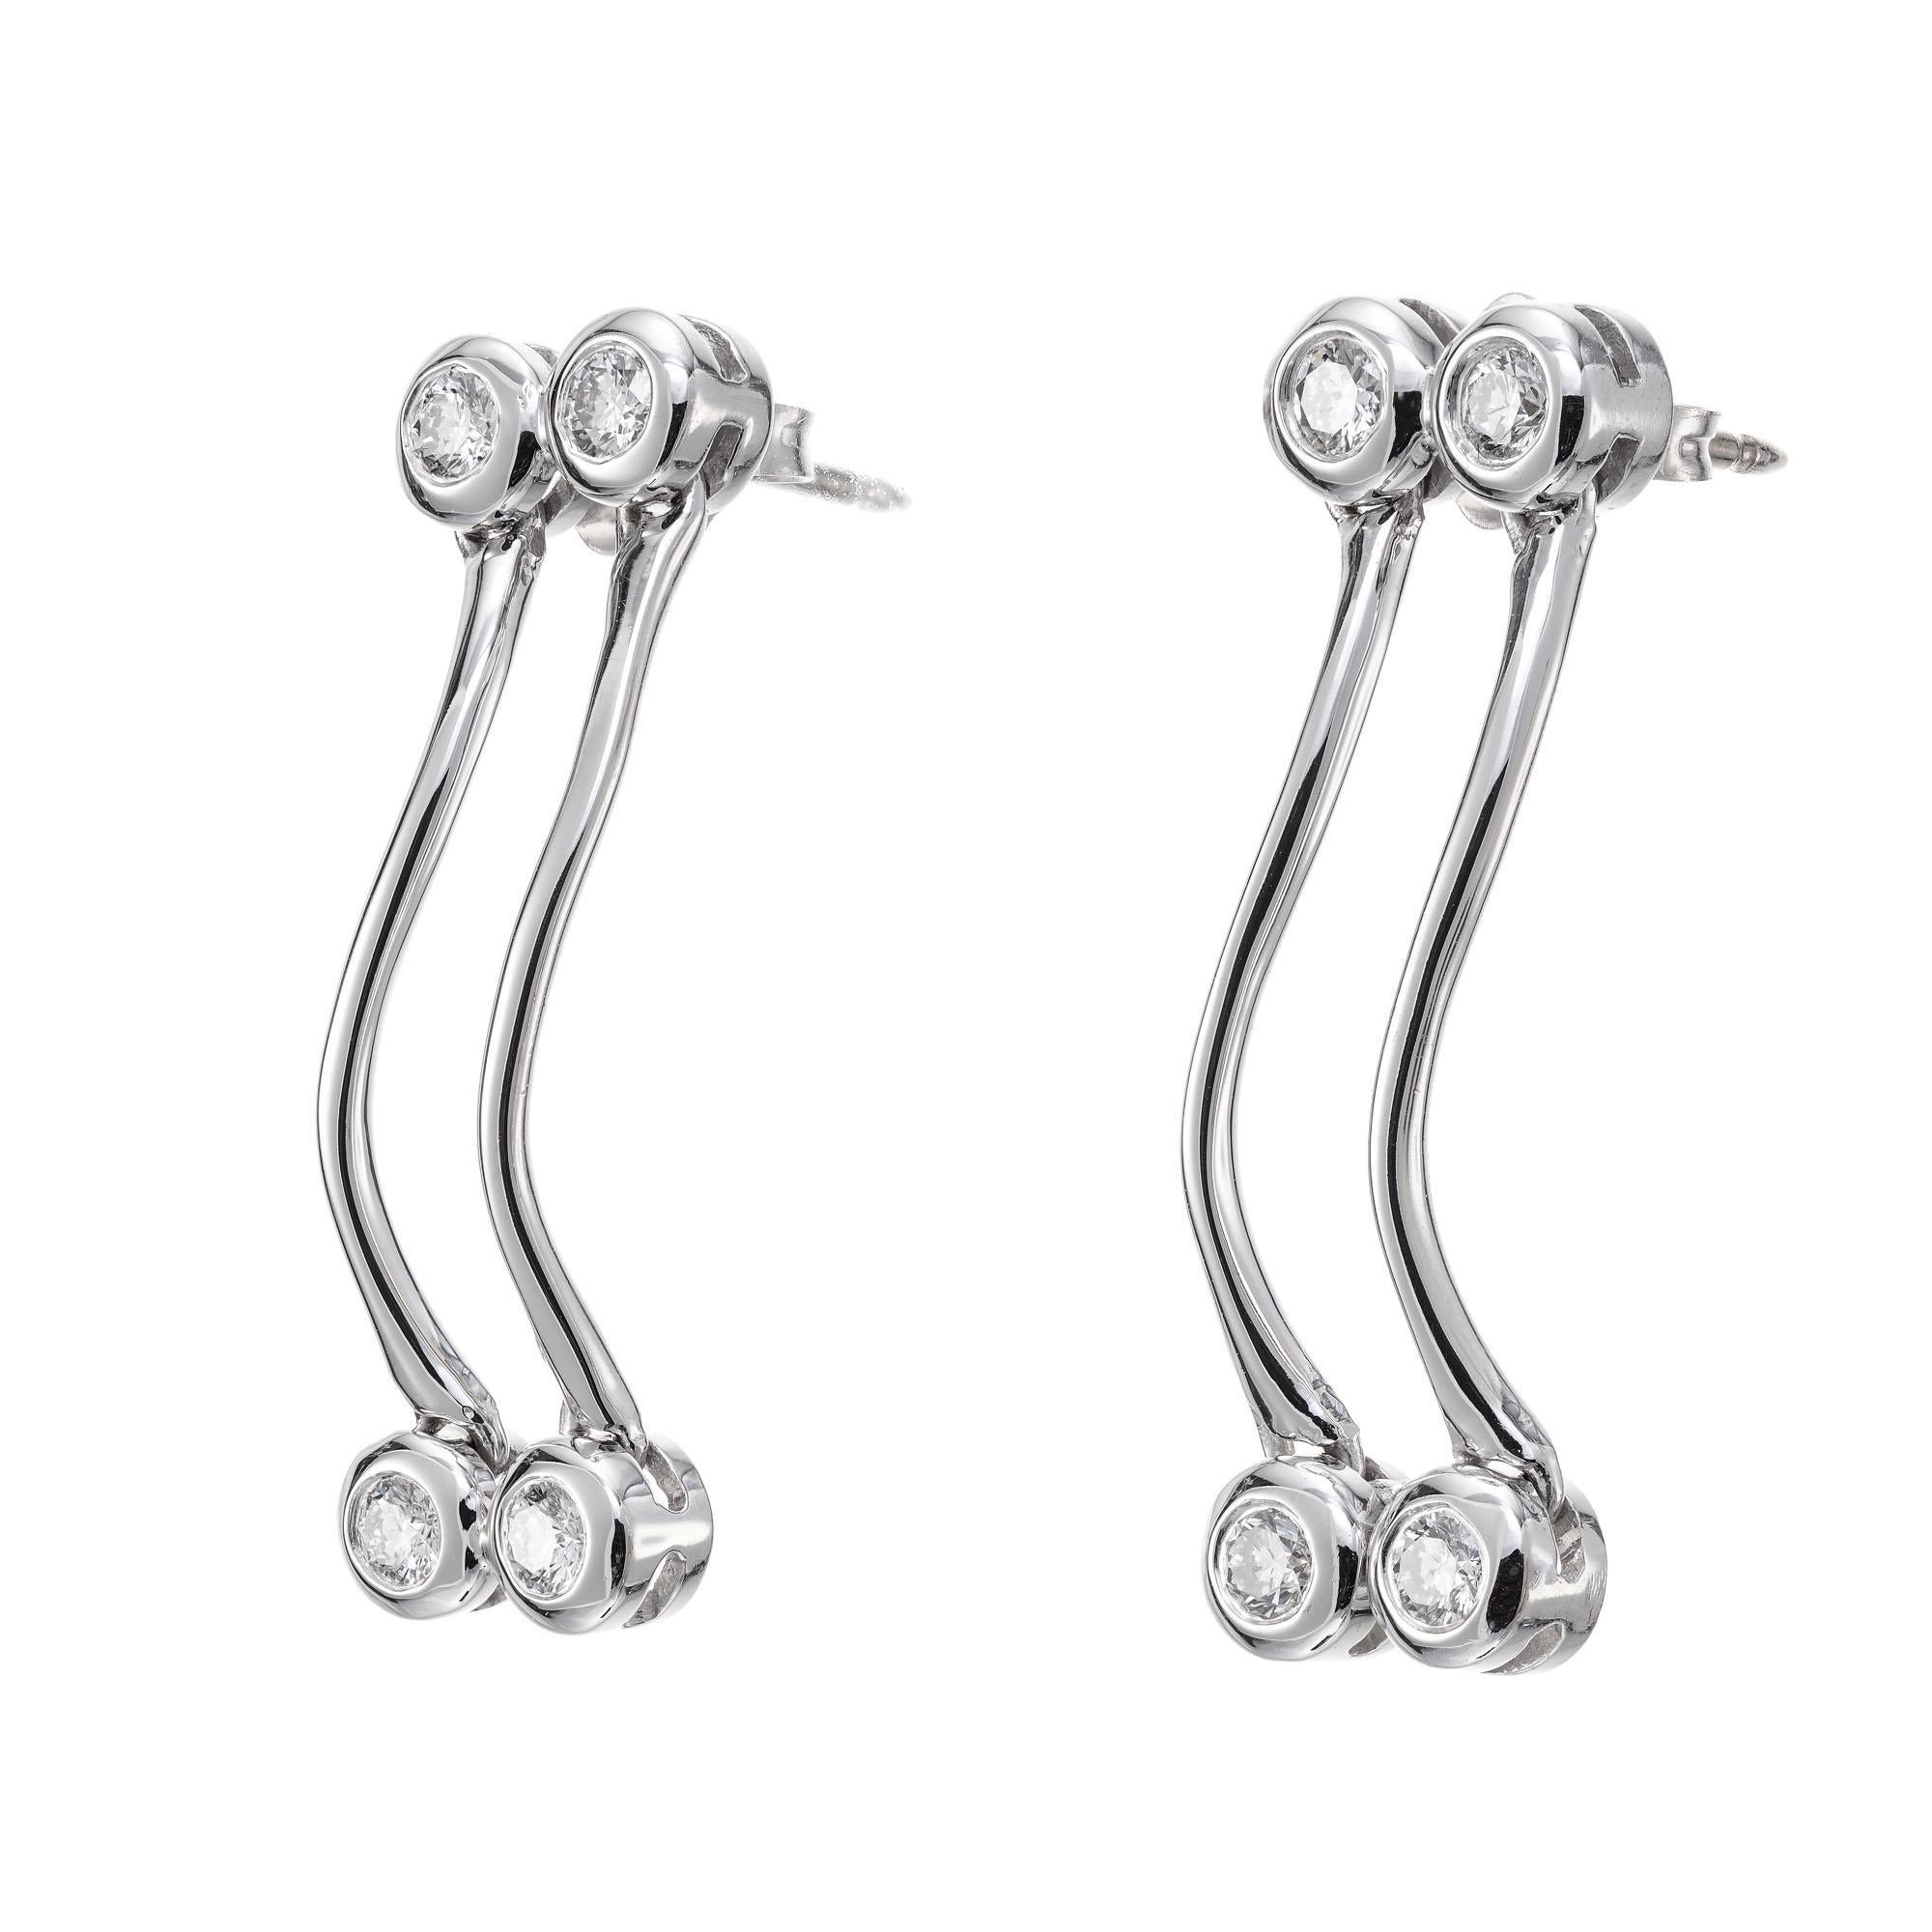 Two row swirl design diamond dangle earrings. 8 round brilliant cut diamonds.  

8 round brilliant cut diamonds, G-H VS approx. .60cts
18k white gold 
Stamped: 18k
5.5 grams
Top to bottom: 29.3mm or 1 1/8 Inch
Width: 9.1mm or 1/3 Inch
Depth or